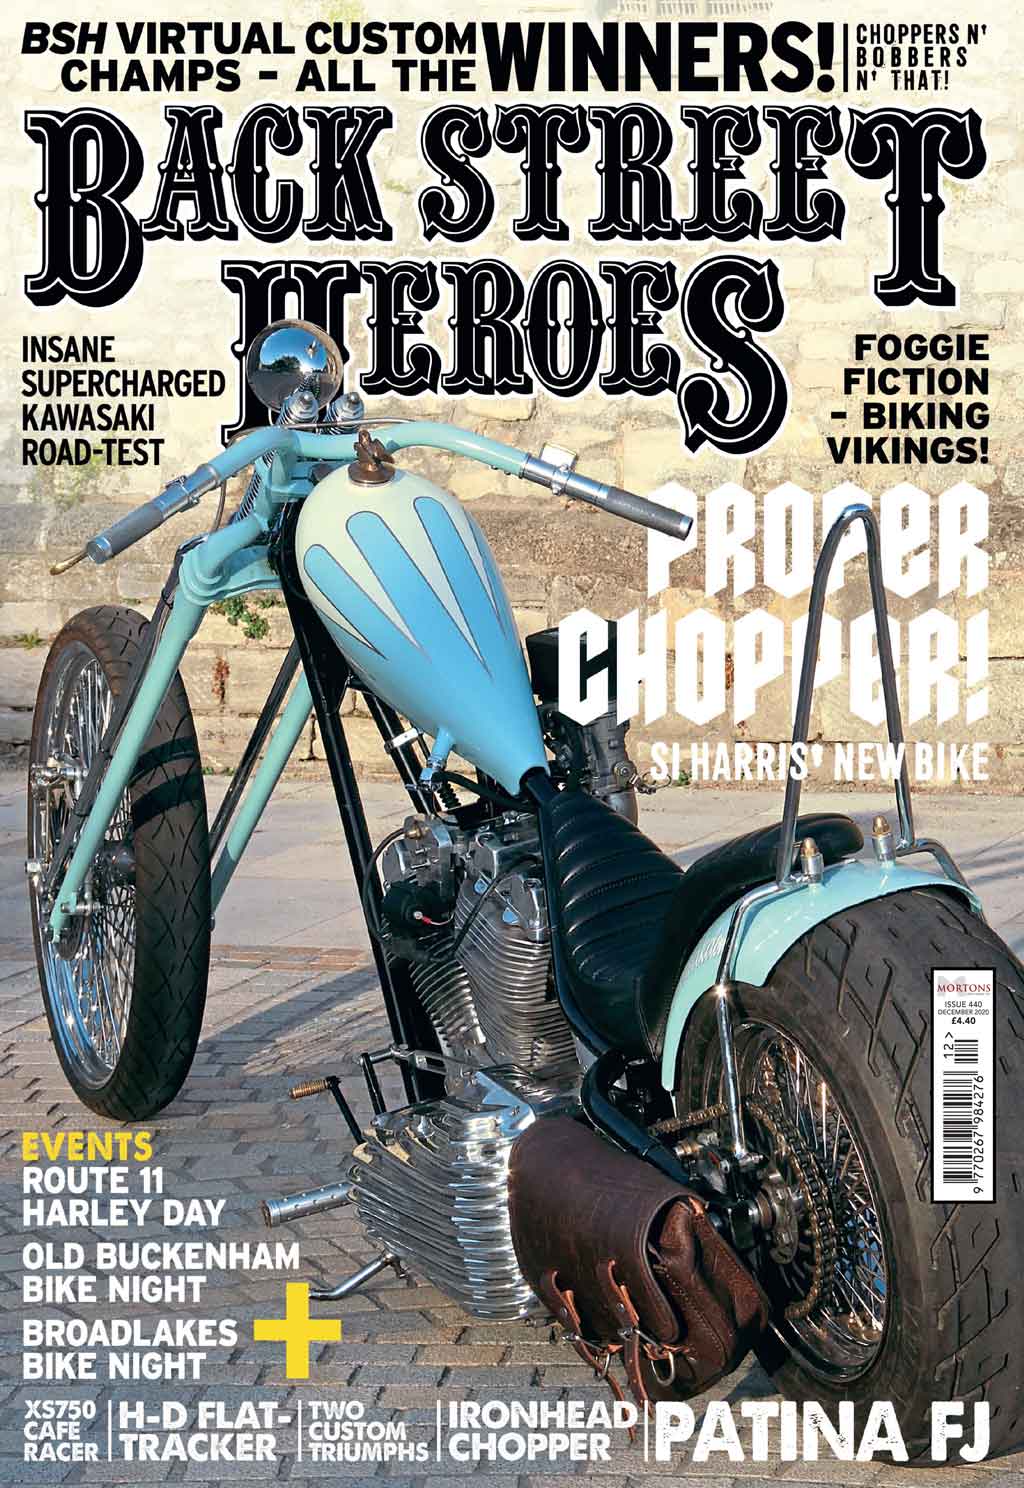 PREVIEW: December issue of Back Street Heroes